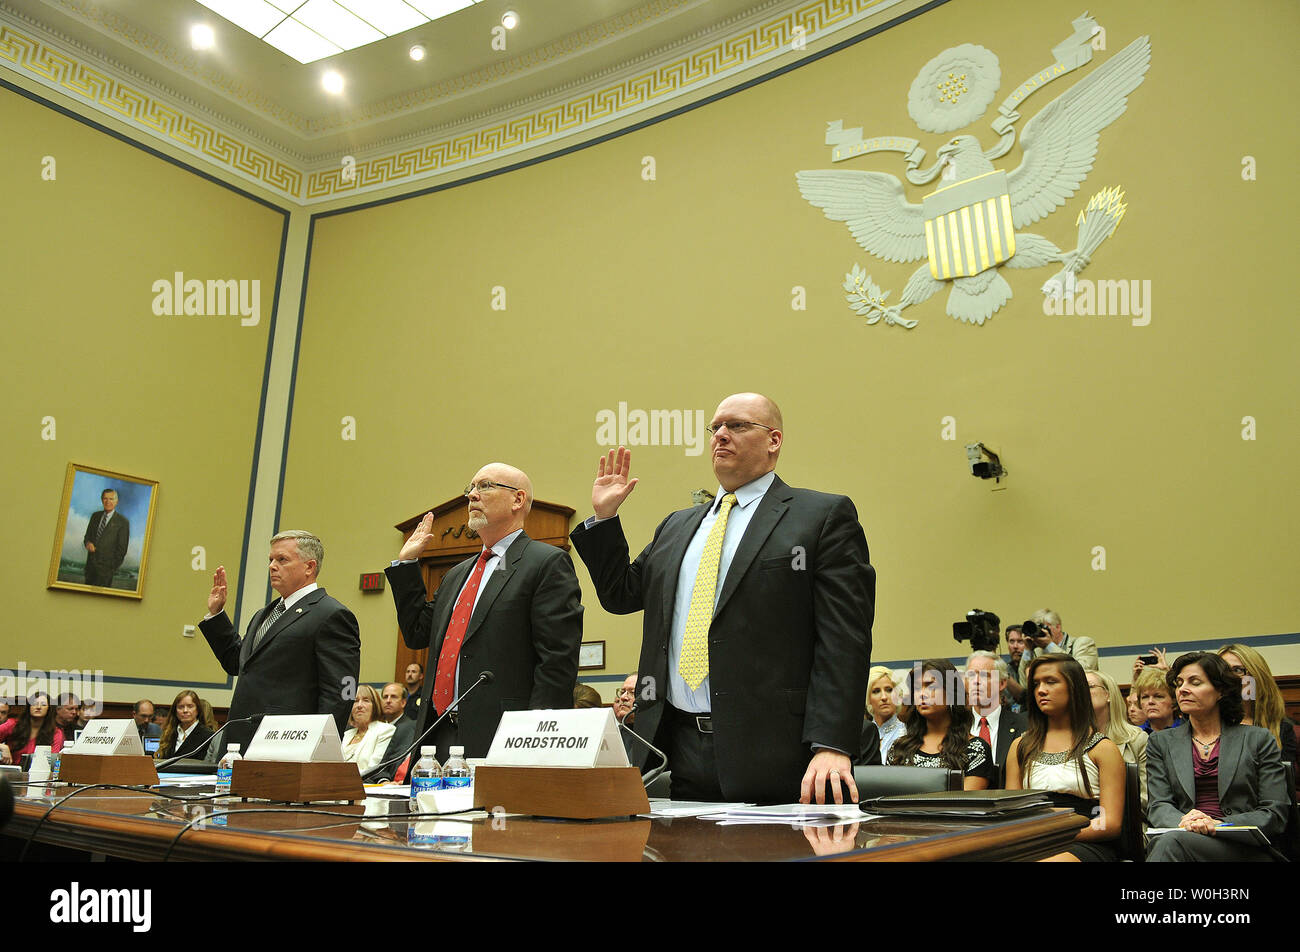 From left to right, Mark Thompson, Acting Deputy Assistant Secretary for Counterterrorism at the Department of State, Gregory Hicks, Foreign Service Officer and former Deputy Chief of Mission in Libya, Eric Nordstrom, Diplomatic Security Officer and former Regional Security Officer in Libya, are sworn in prior to a House Oversight and Governmental Reform Committee hearing on the terrorist attacks on the diplomatic compound in Benghazi, on Capitol Hill on May 8, 2013 in Washington, D.C. UPI/Kevin Dietsch Stock Photo